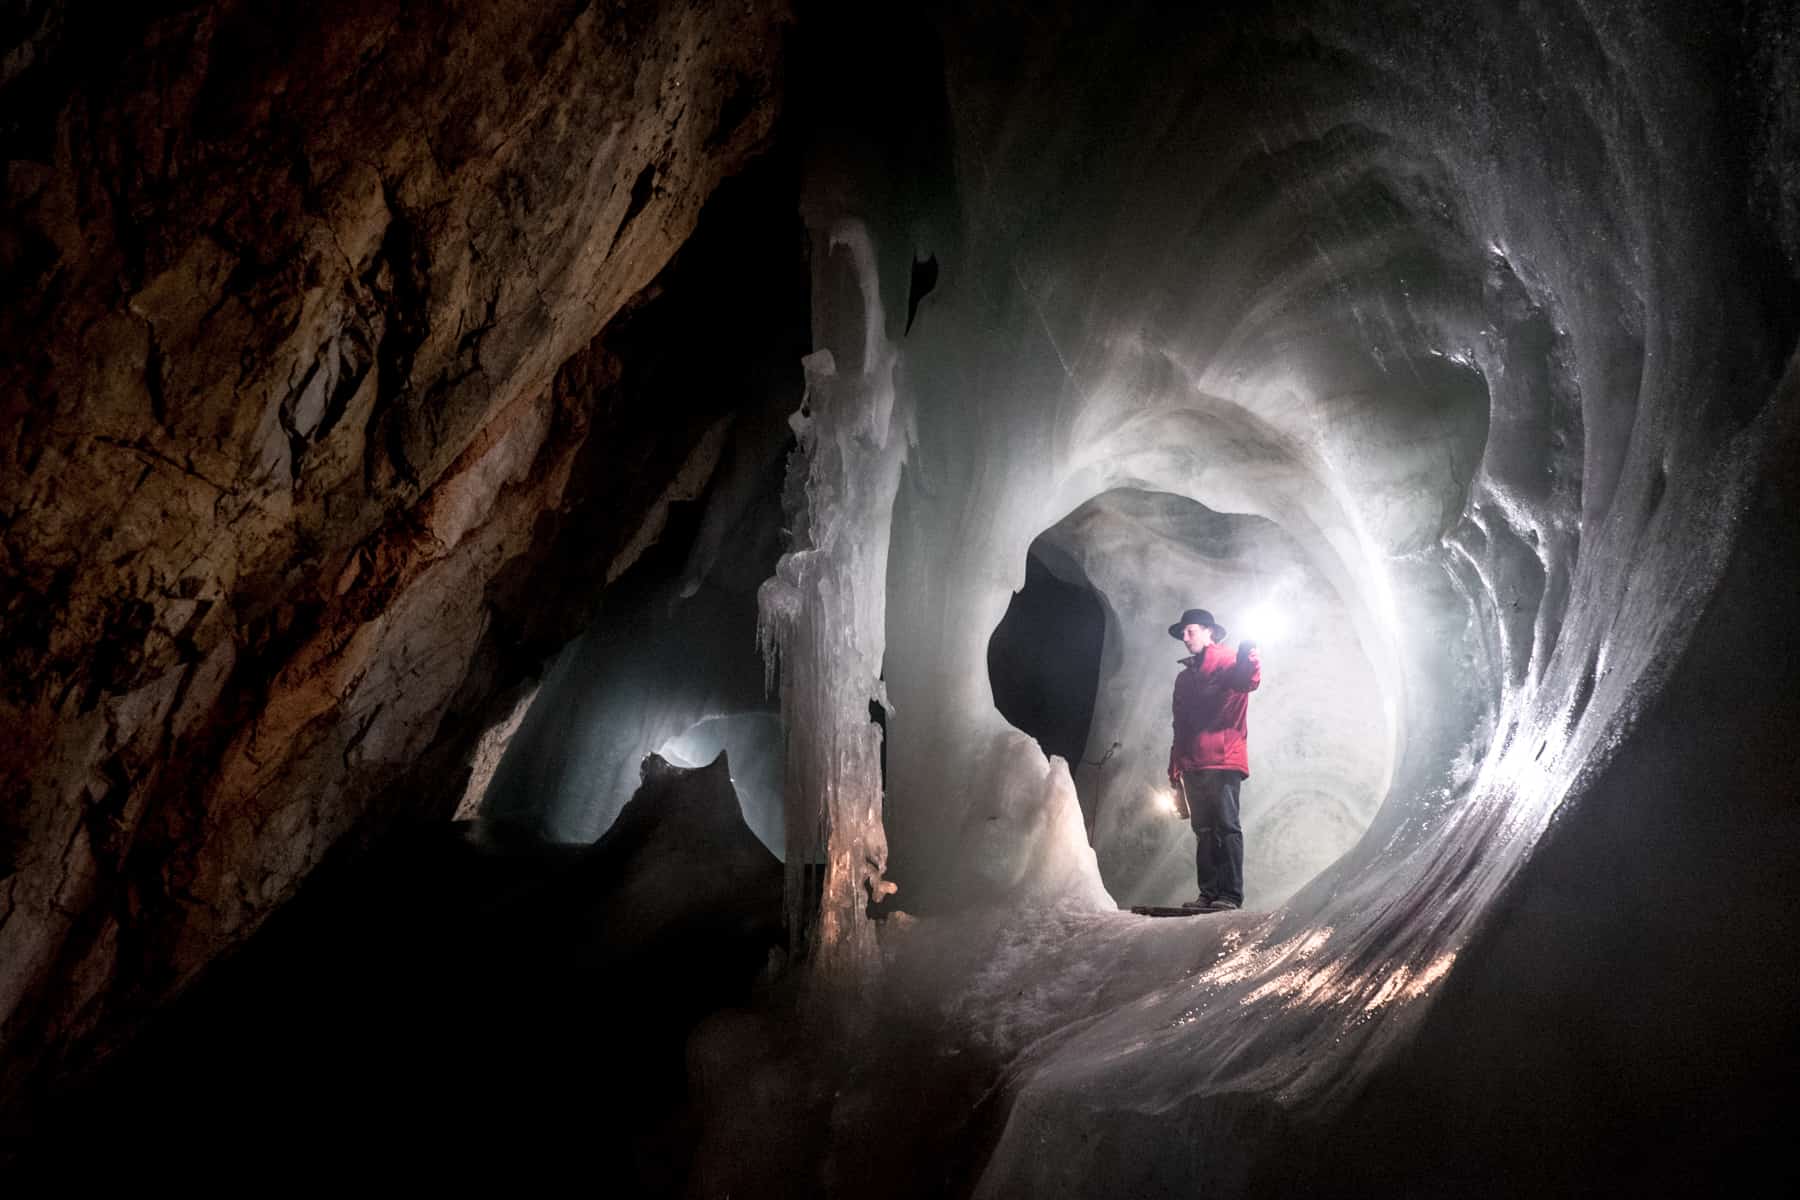 A man in a red jacket and black hat stands within a circle of white illuminated ice in the Eisriesenwelt largest ice cave in the world in Austria